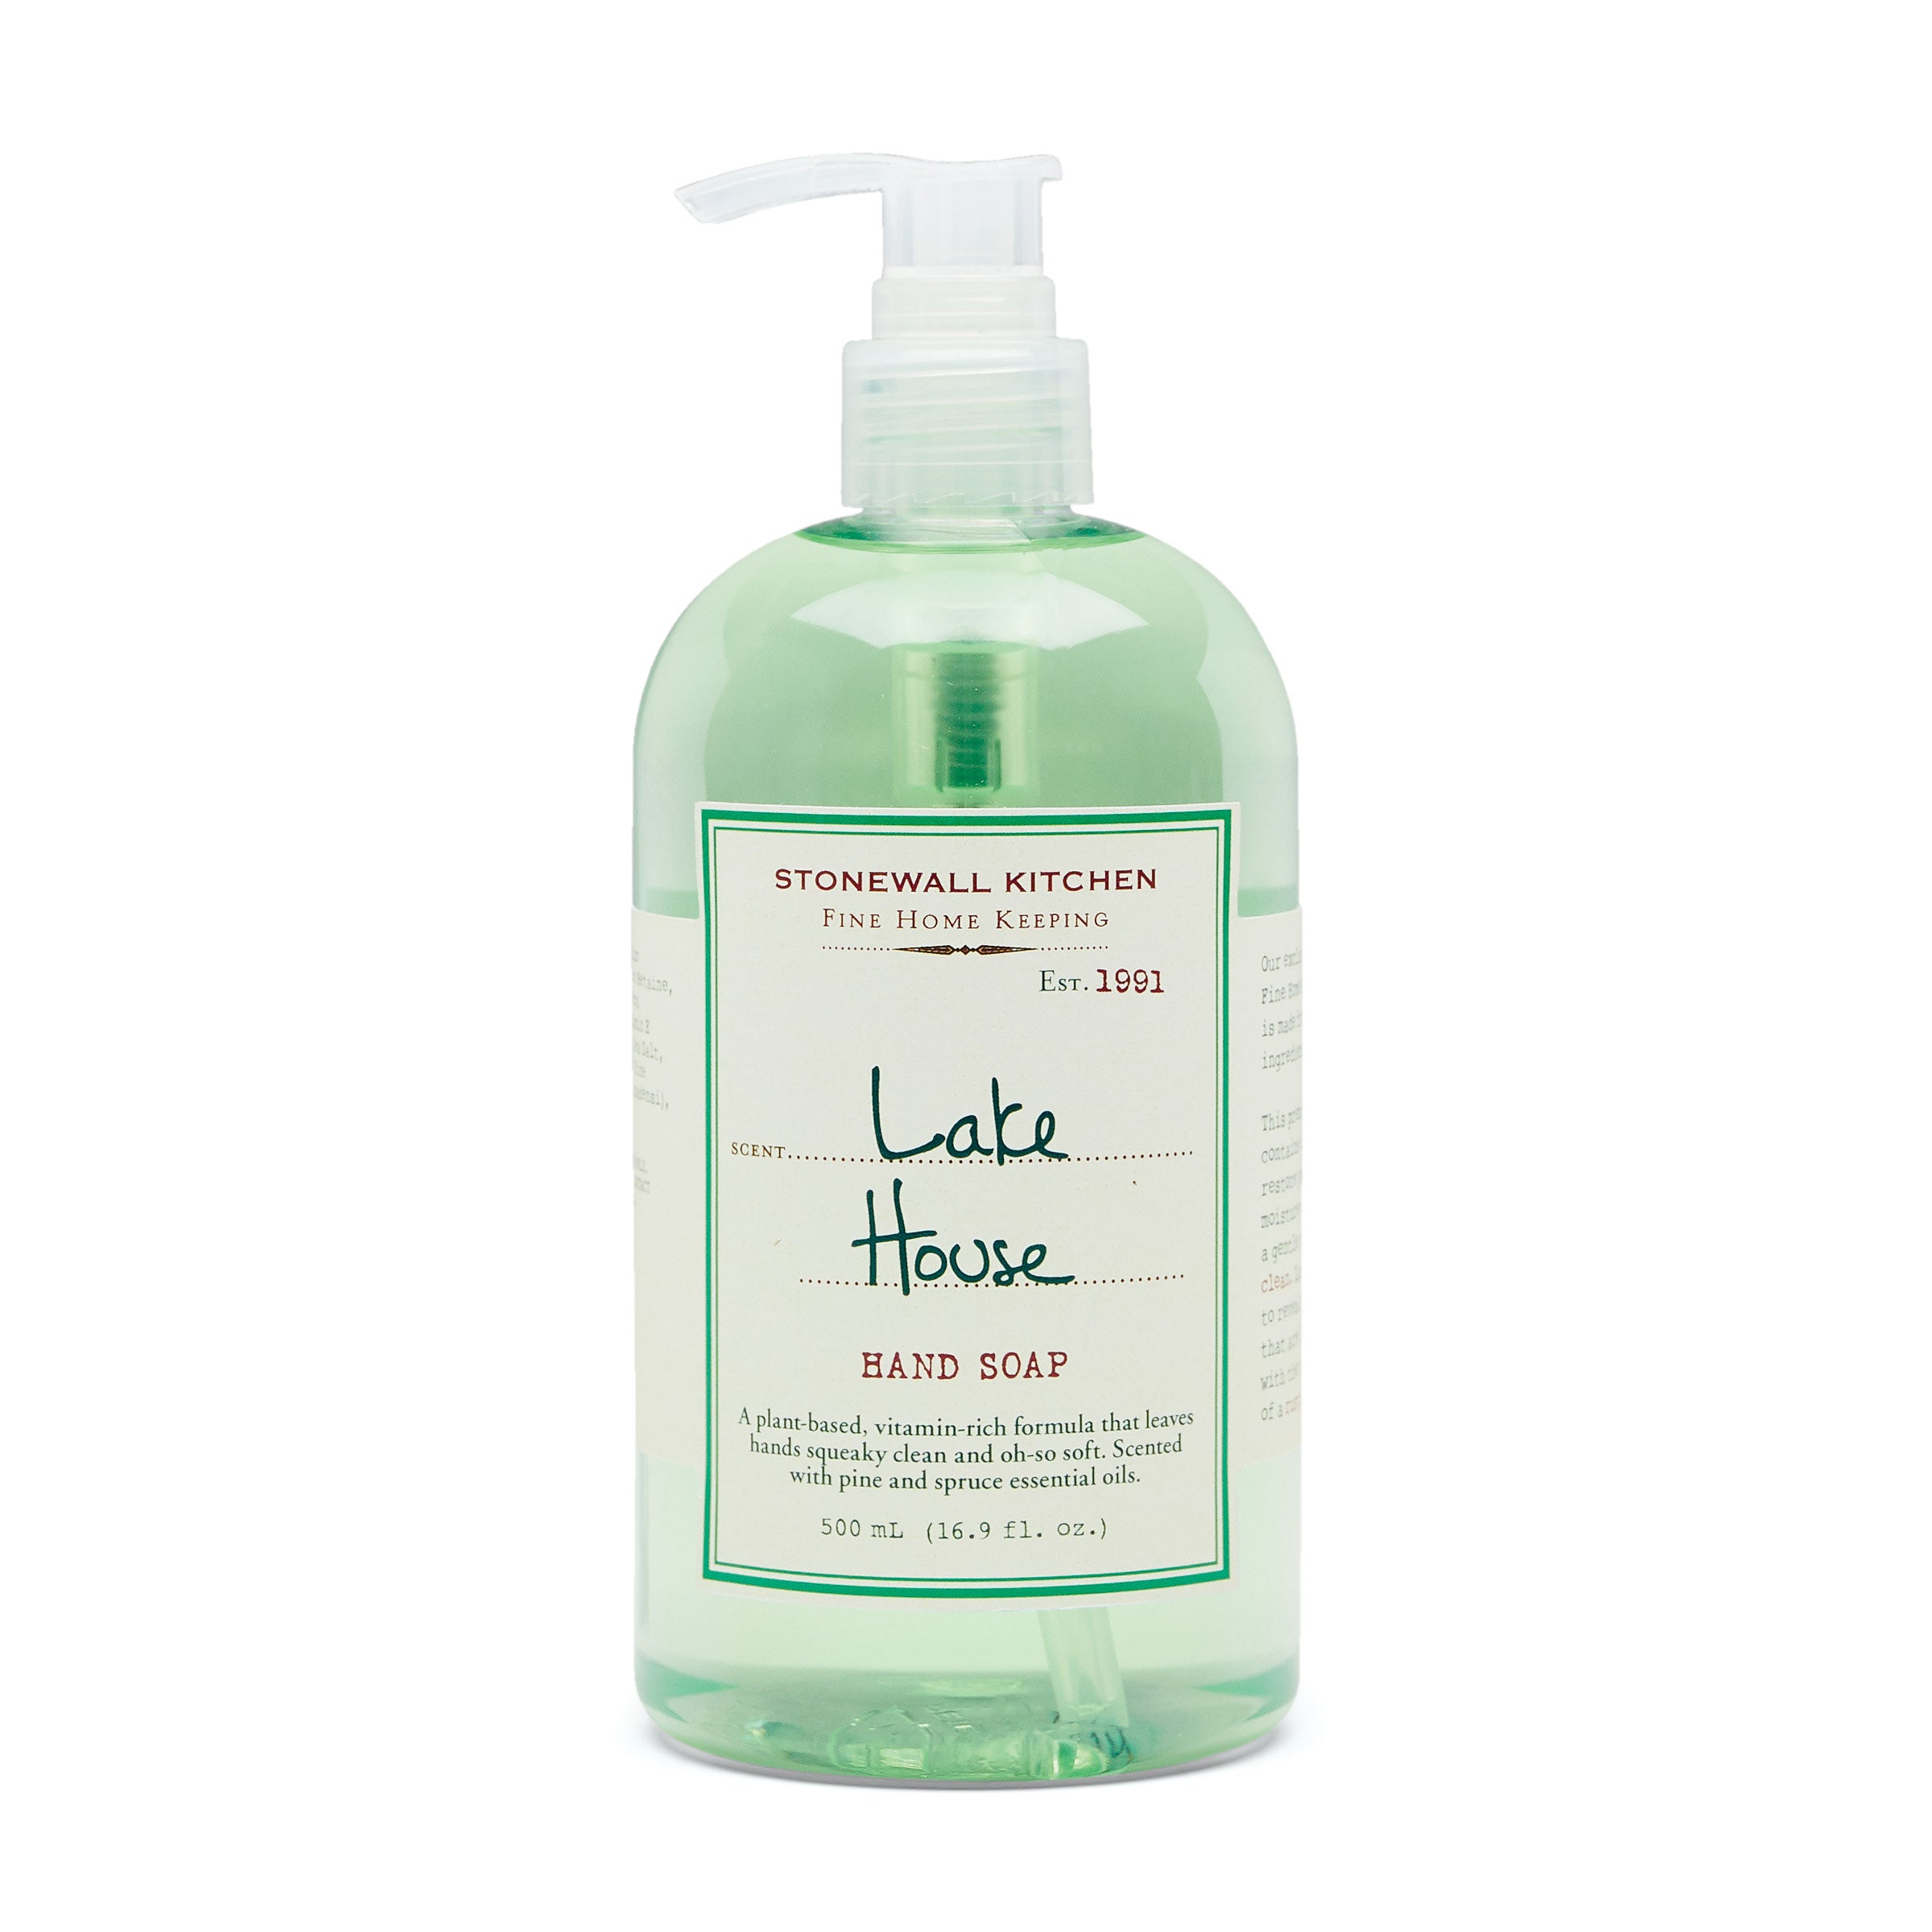 Stonewall Kitchen Hand Soaps - Olive Oil Etcetera 